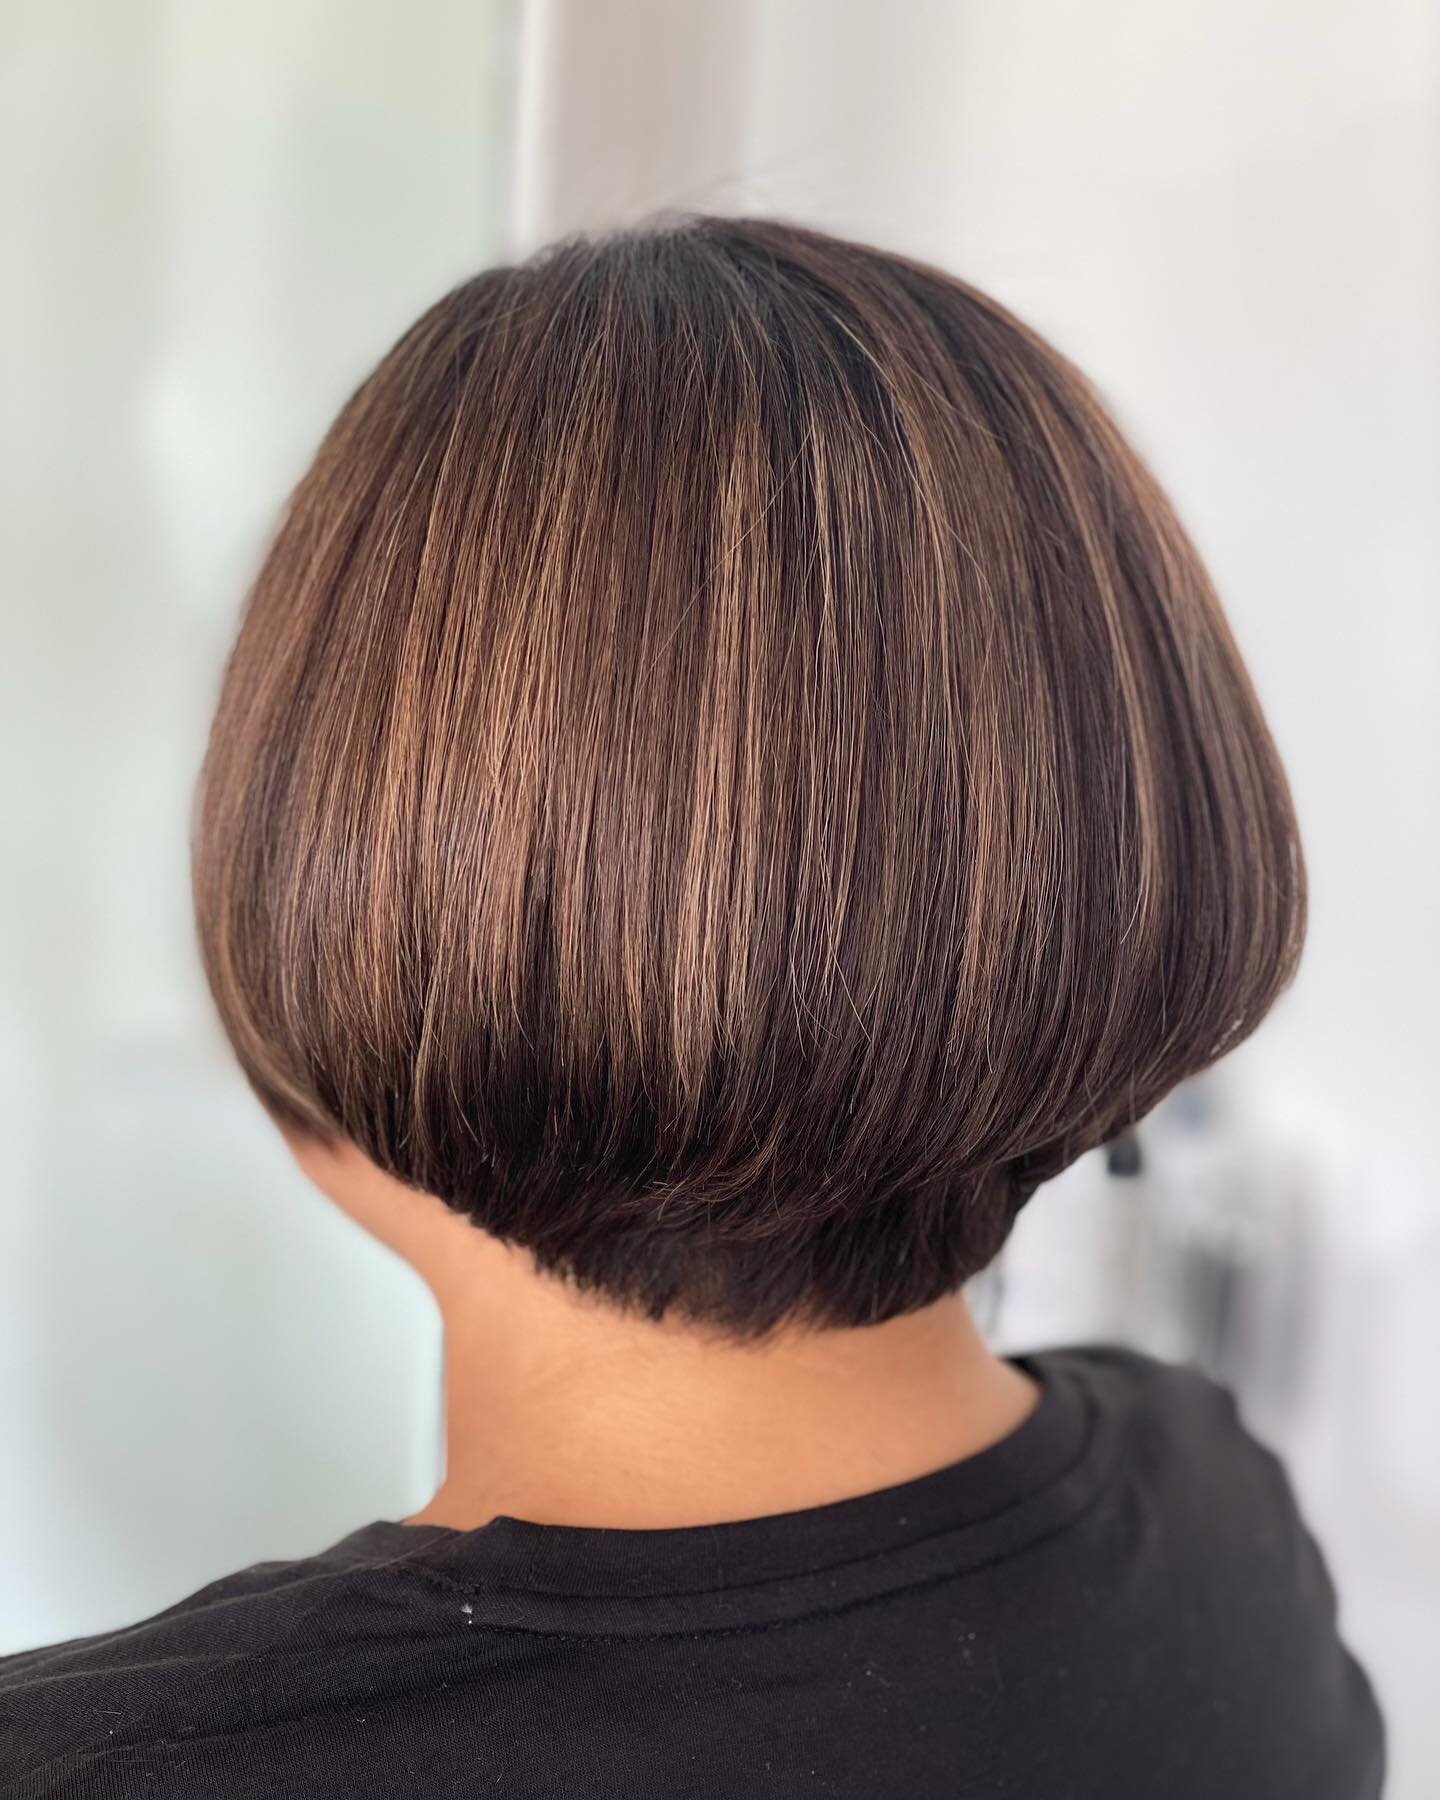 A hair story

Everyone&rsquo;s hair has a history. Transitioned from bright blonde to natural brunette with soft contrasting highlights and dimension. 
From long to lob and from lob to graduated bob
Swipe ⬅️ the progression 

#yourbesthair #hairmakeo